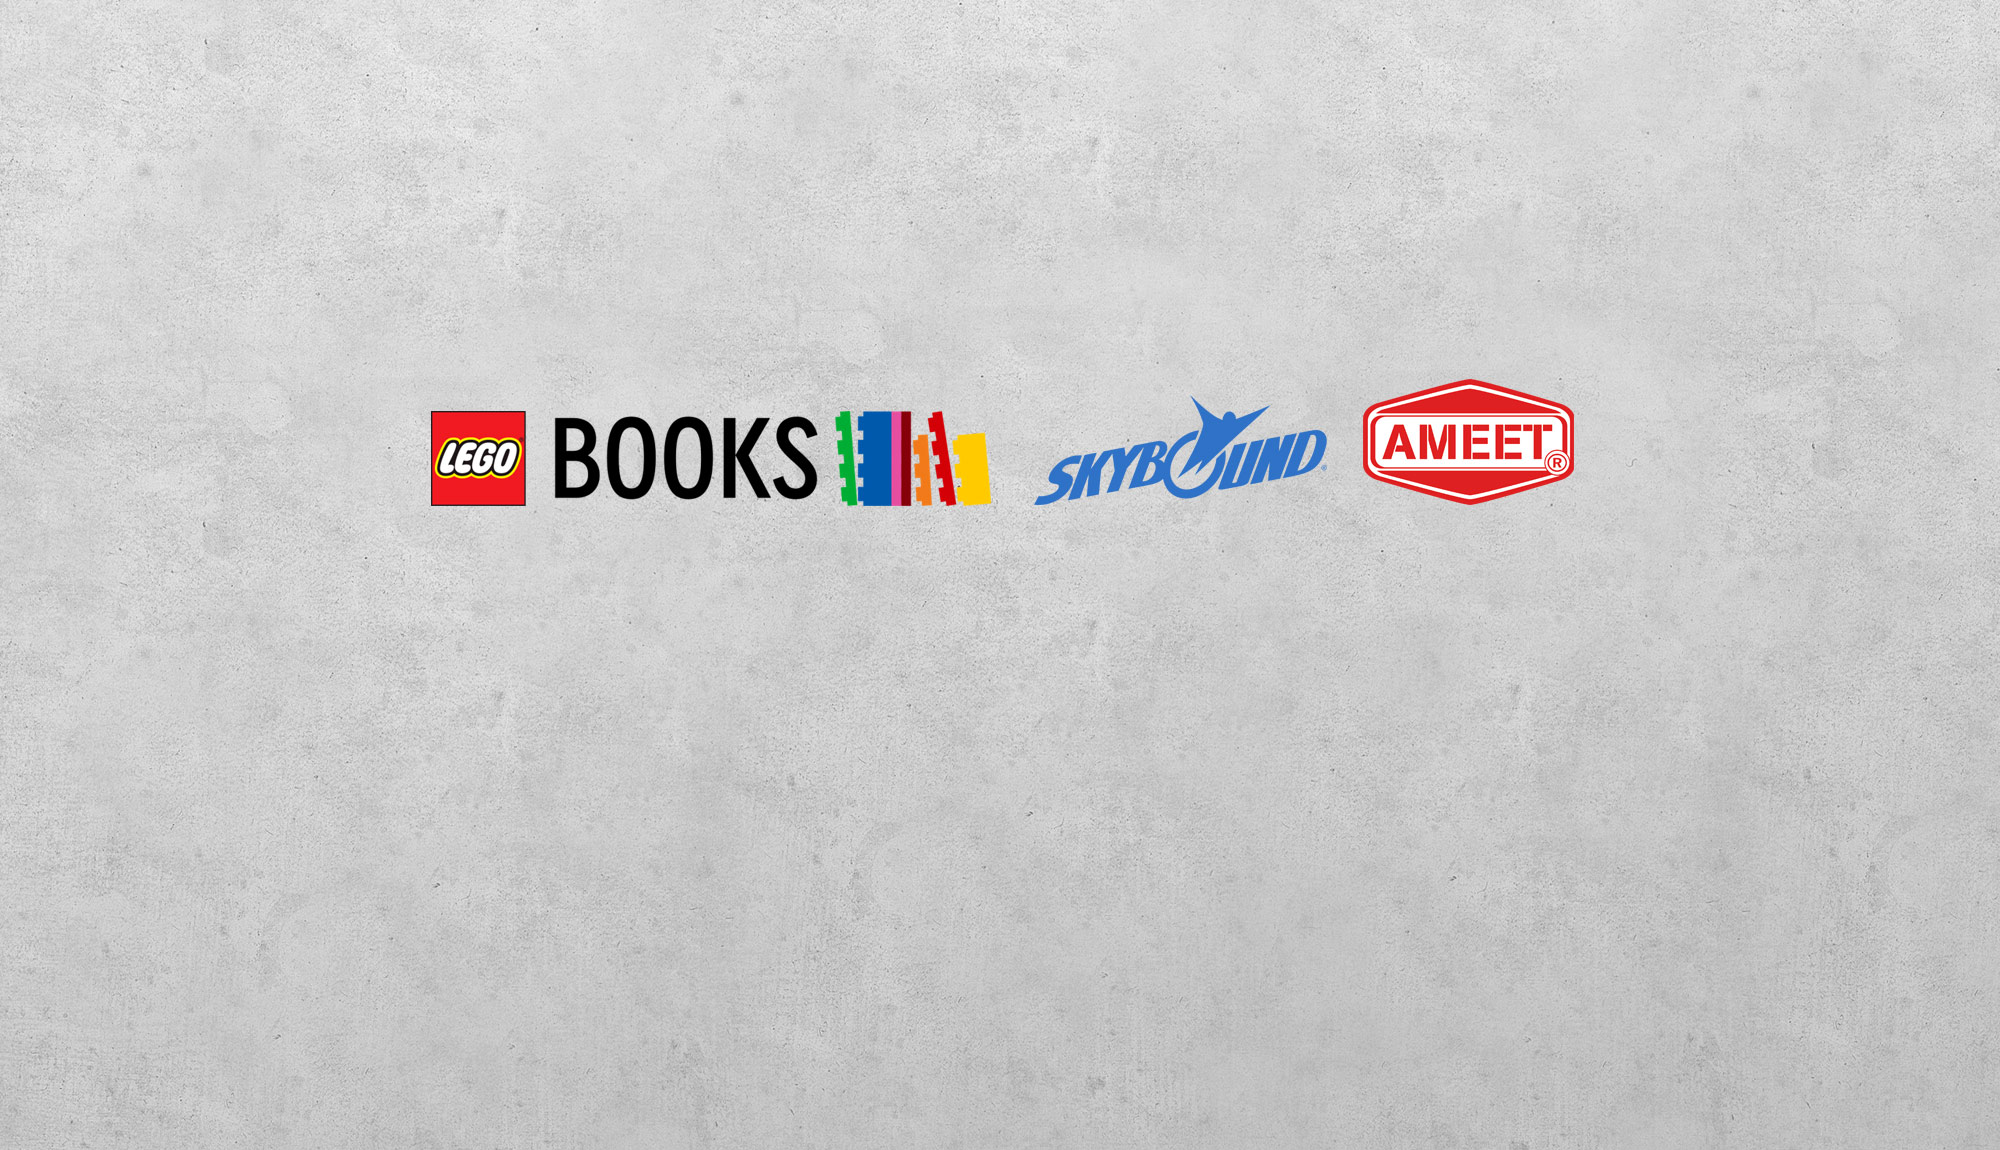 Skybound Entertainment Partners with AMEET Publishing in New LEGO® Comic Book Deal